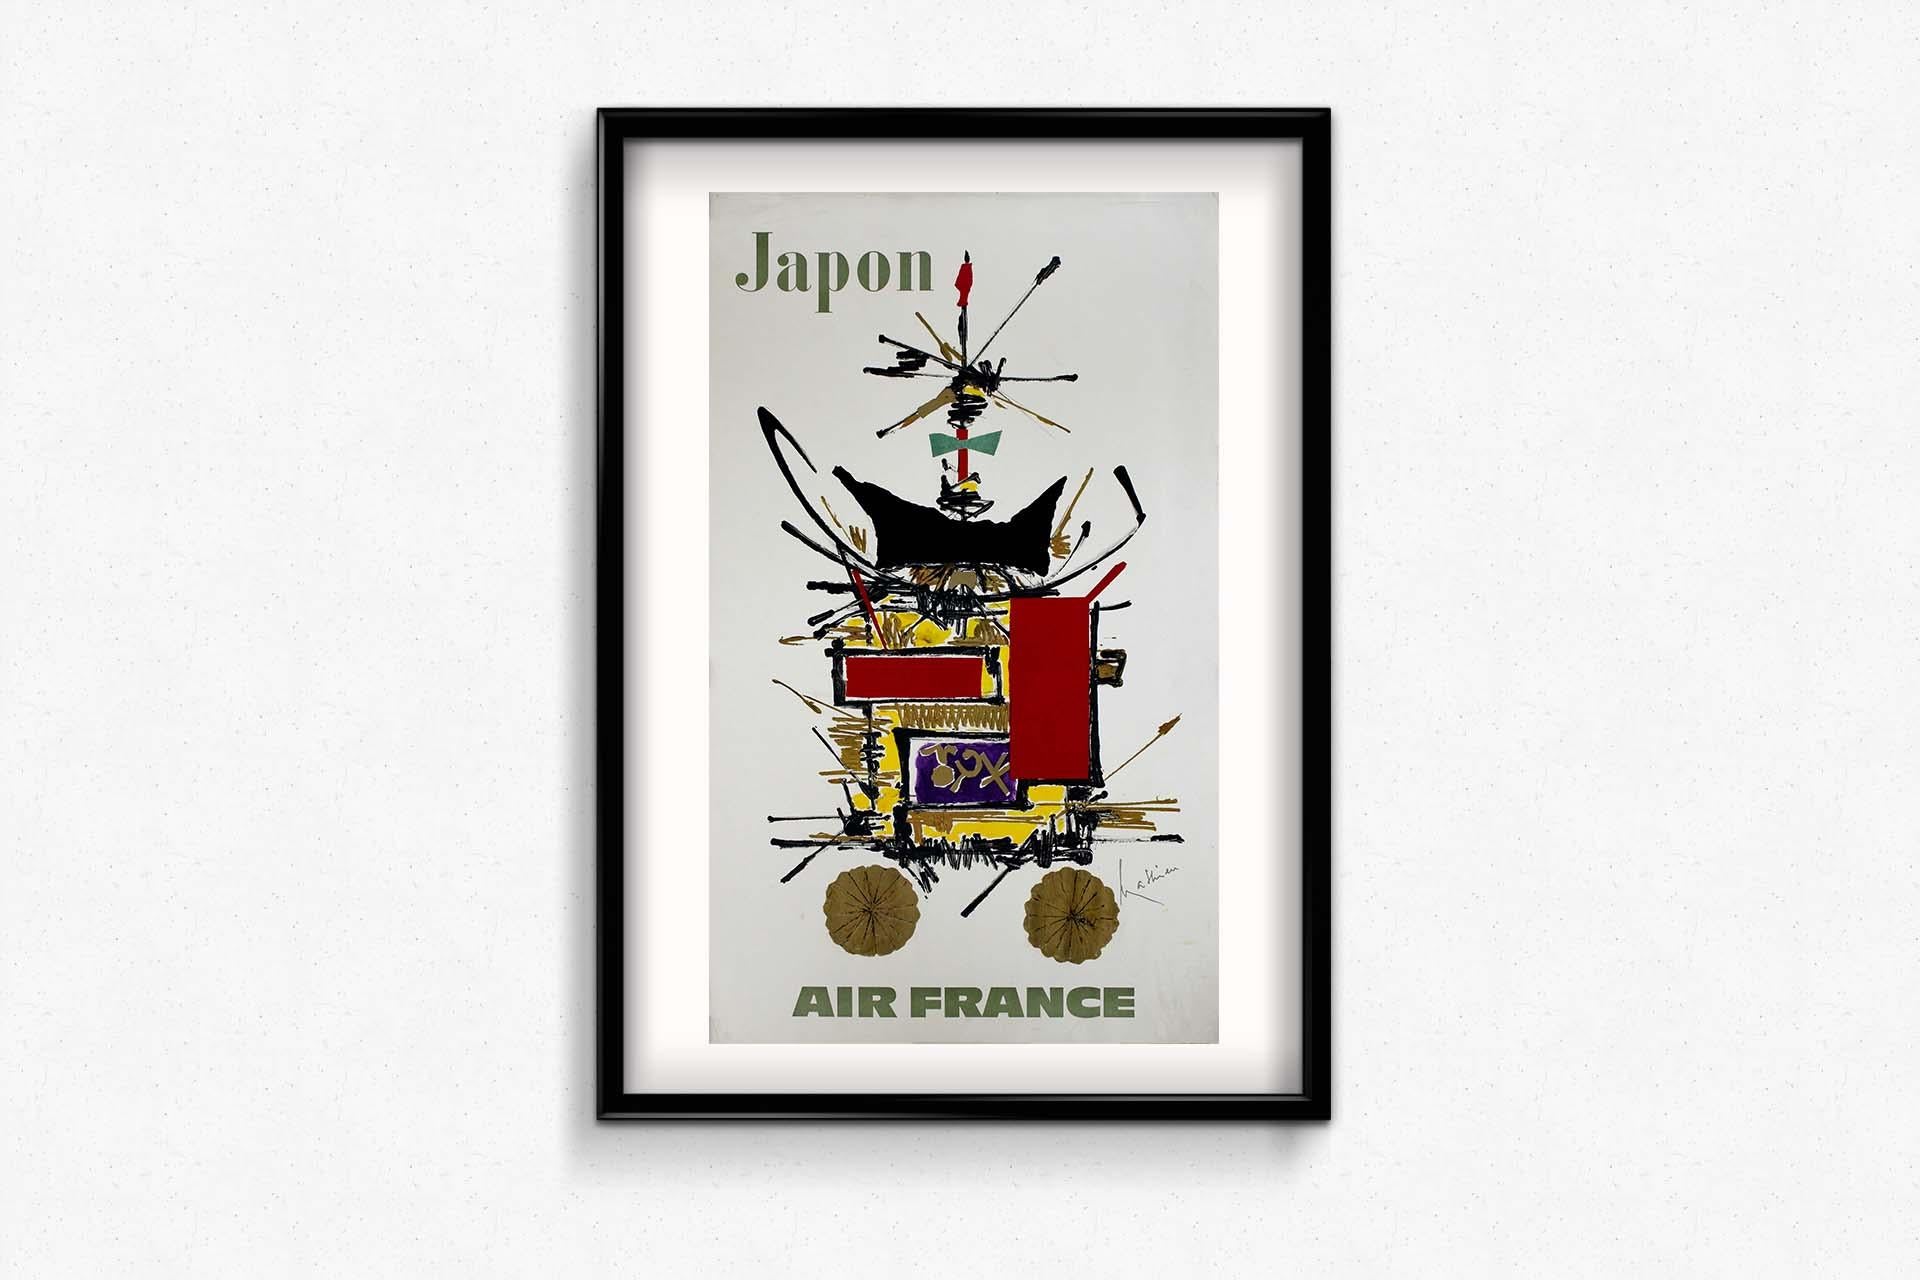 In the illustrious realm of travel posters, certain pieces transcend their promotional purpose to become timeless works of art. Among these, Mathieu's 1967 Air France Japan poster stands as an exquisite example. An ode to the Land of the Rising Sun,